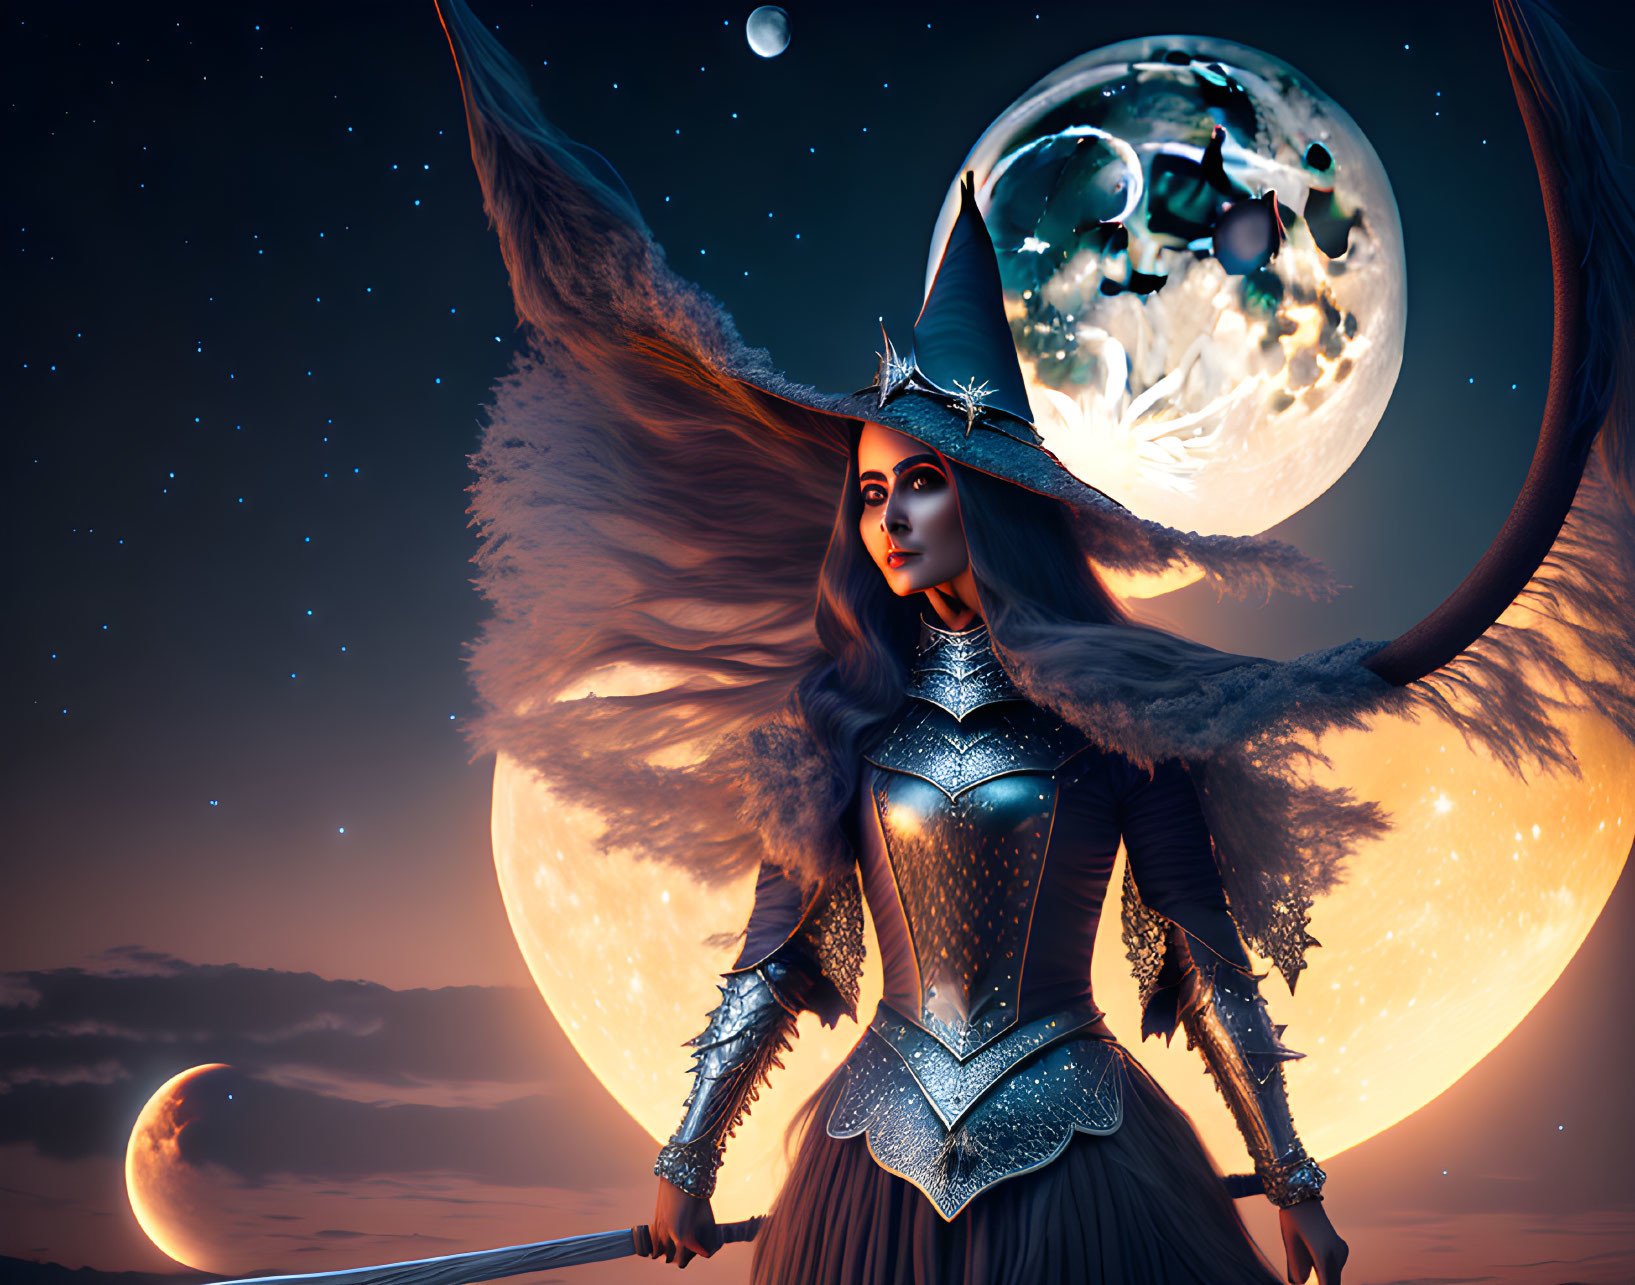 Fantastical warrior woman in elaborate costume with sword under surreal moons